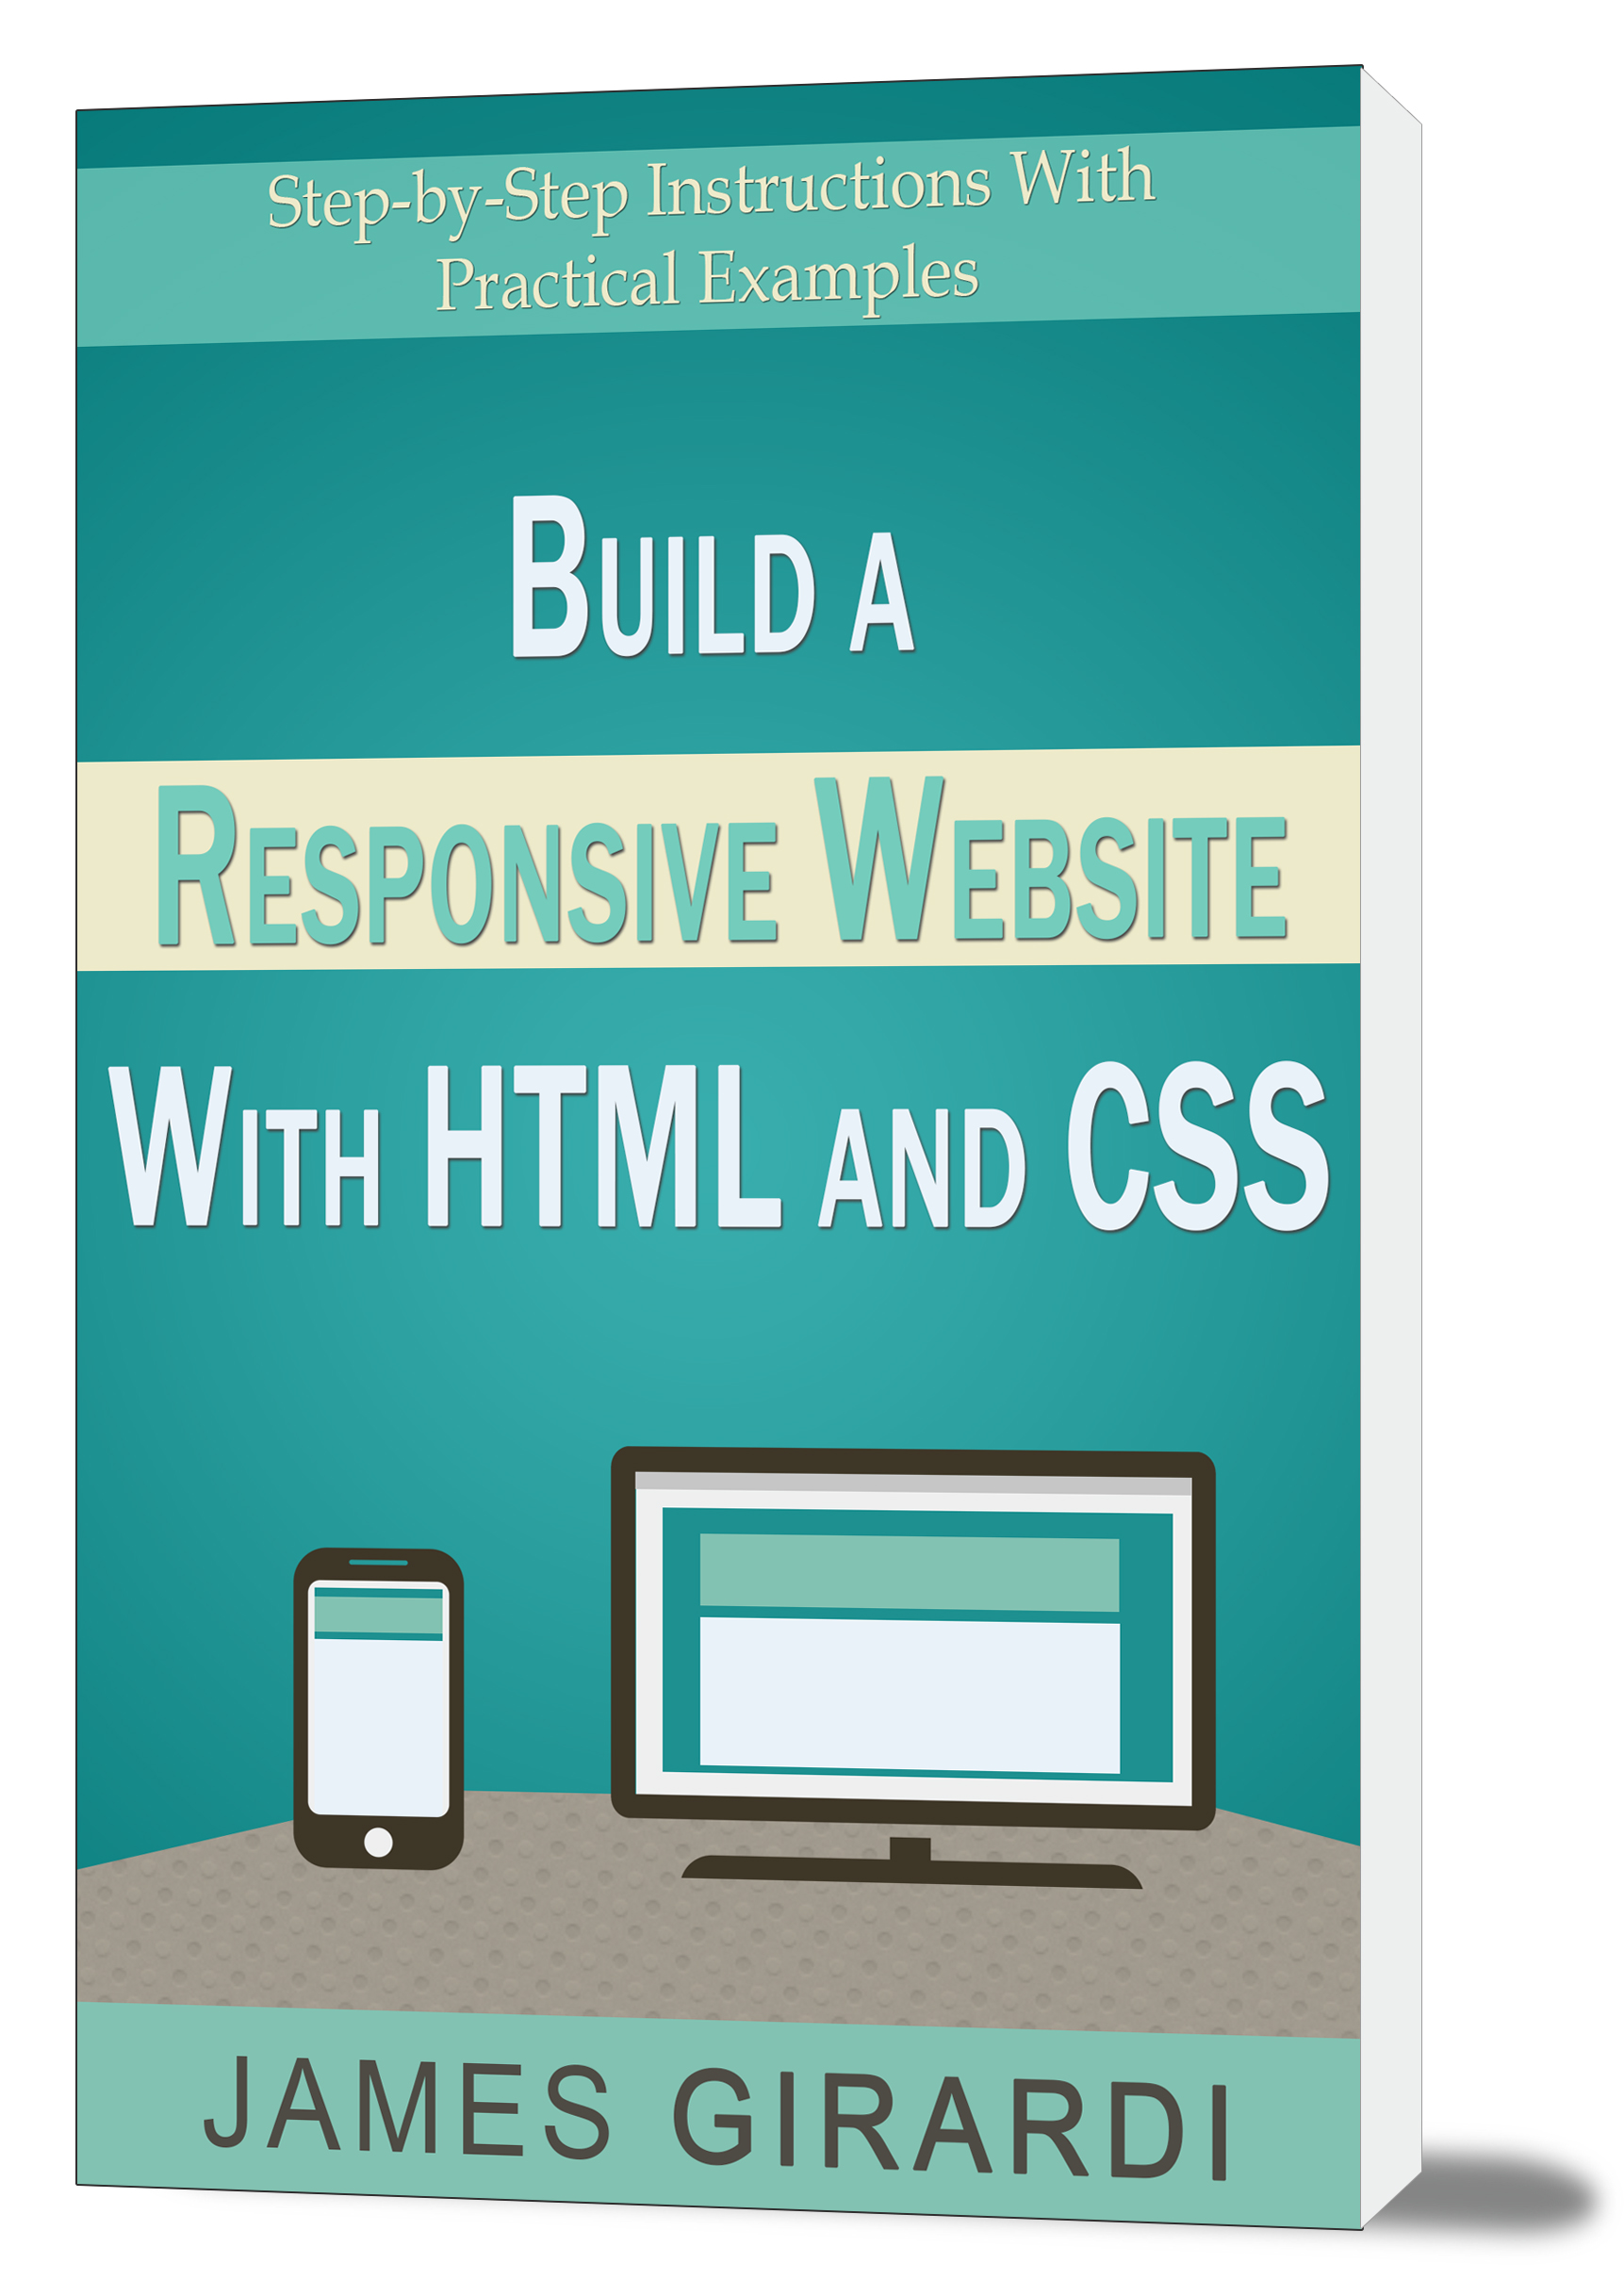 Book on How to build a website with HTML and CSS by James Girardi